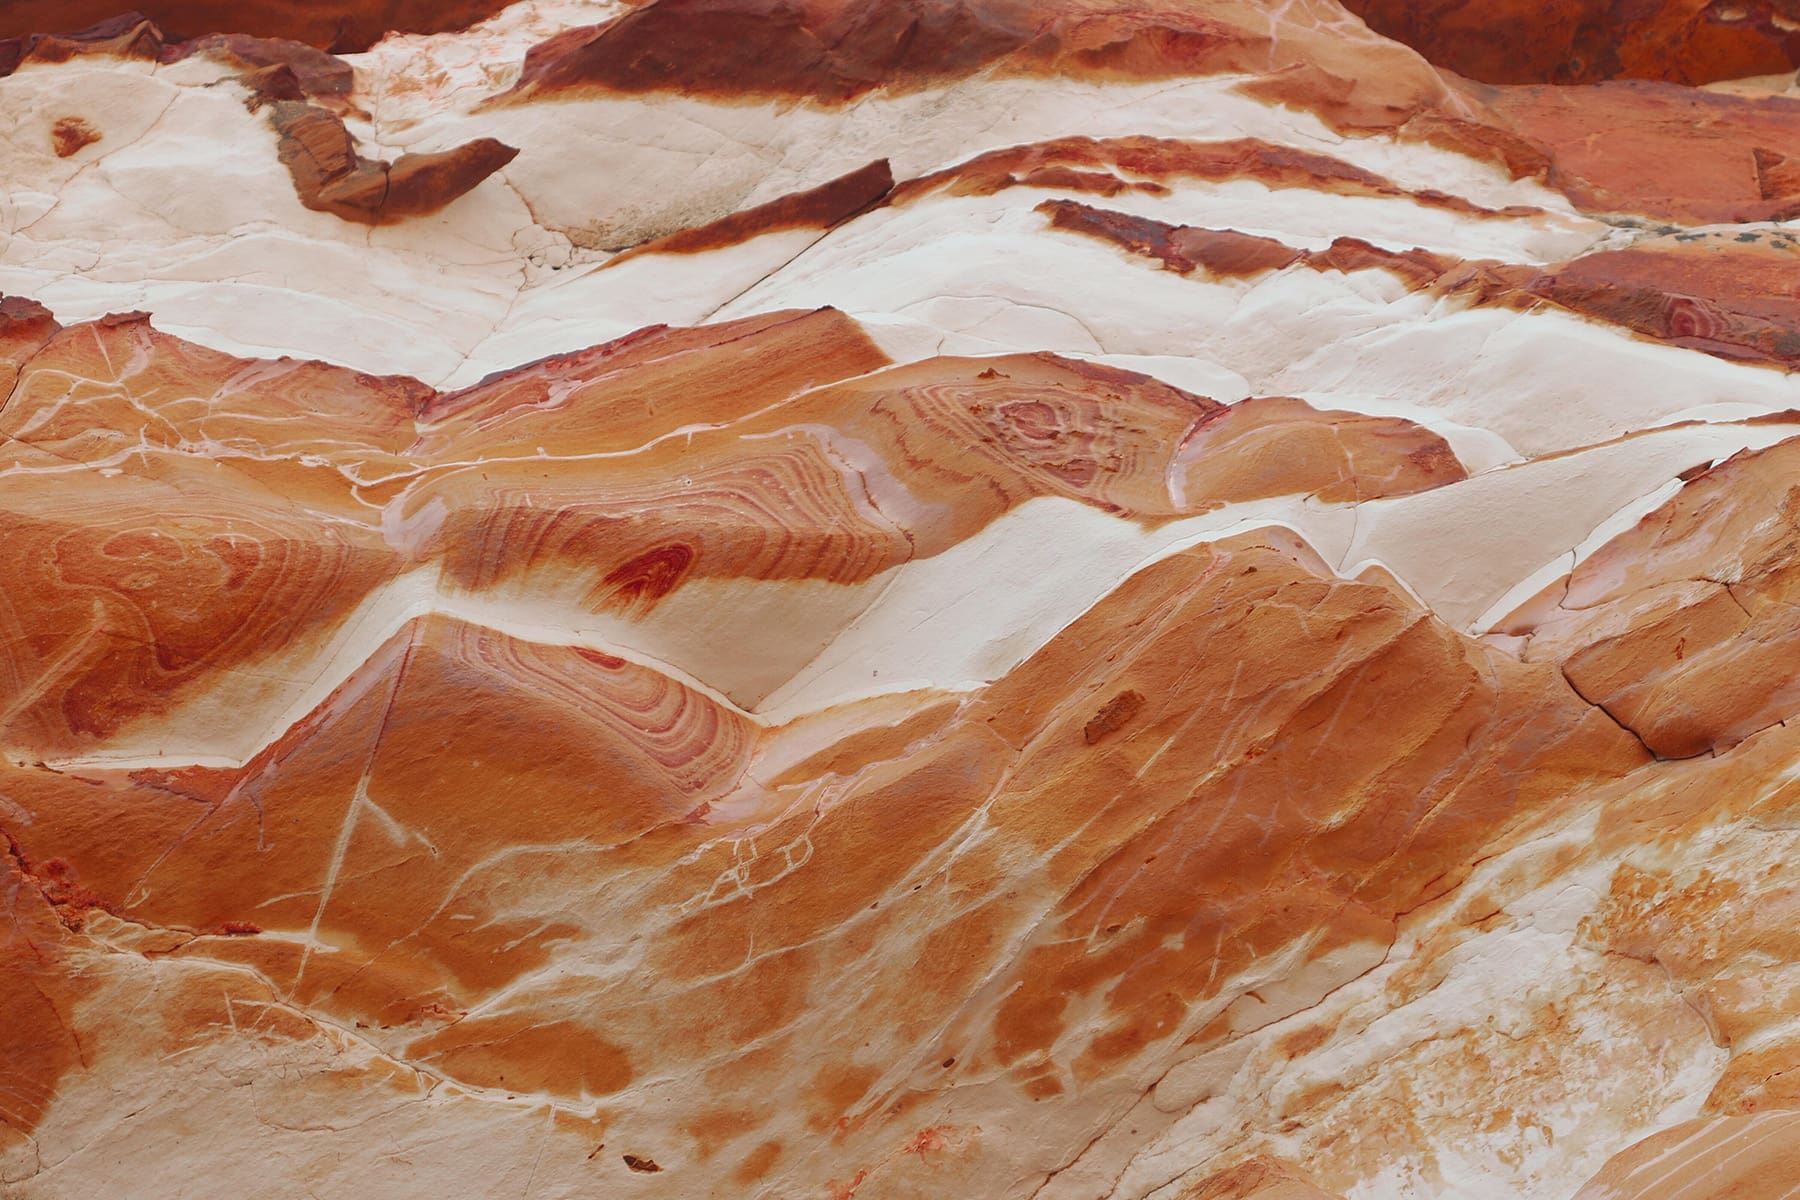 Abstract close up of a marbled brown and beige colour rock texture